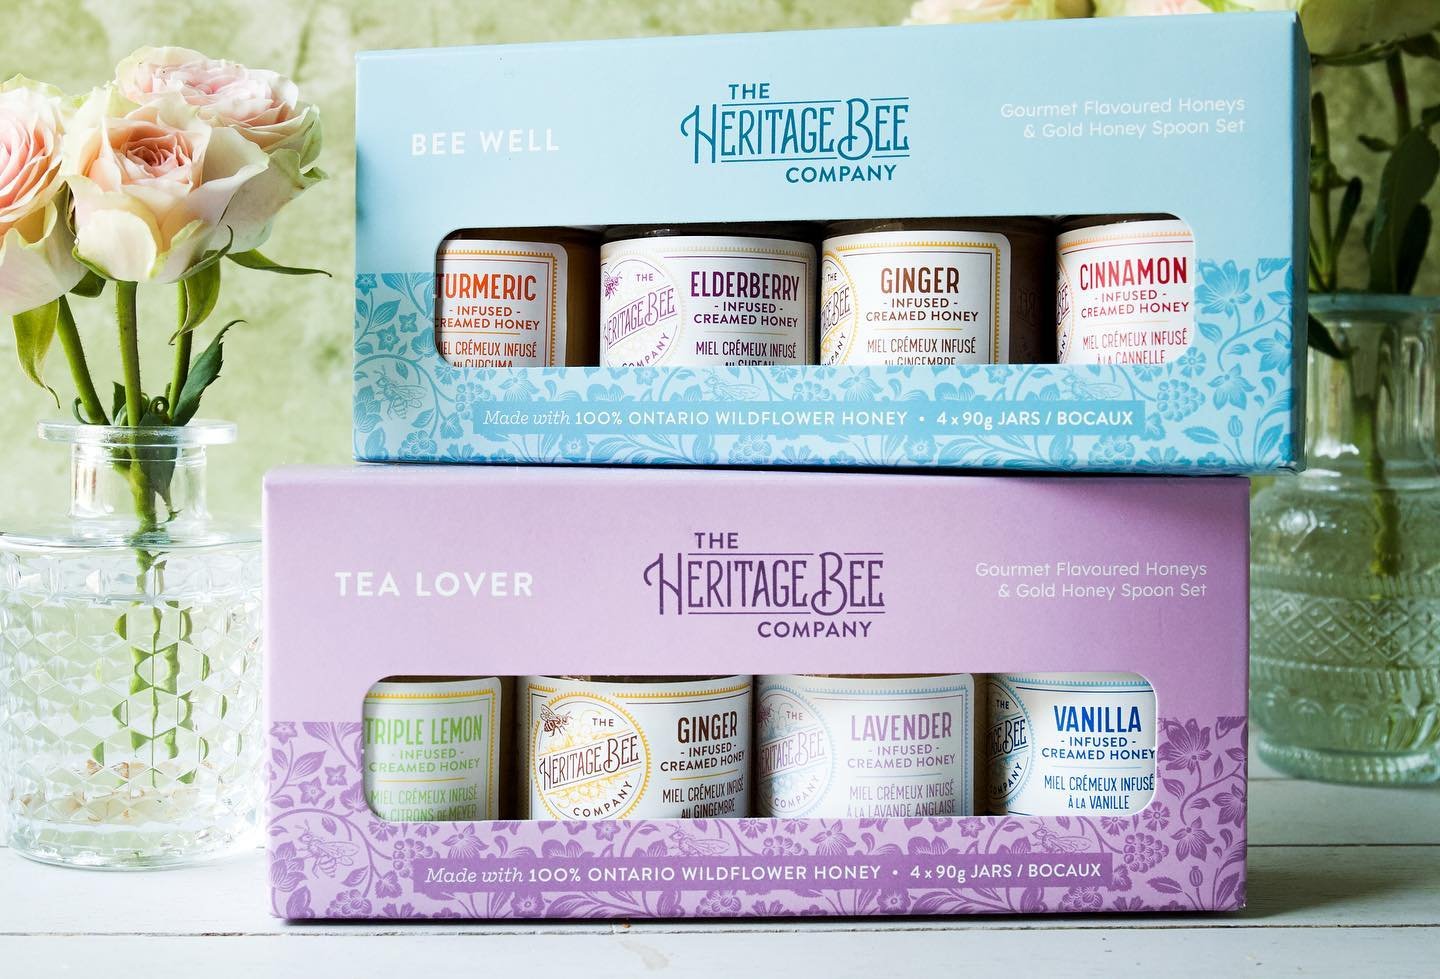 We are restocked on our absolute favourite honey from @heritagebeeco and have two gift sets now available! Aren&rsquo;t they absolutely gorgeous? 🌸🐝#ontariophotographer #canadianmade #madeincanada #northernontariophotographer #northernontarioliving